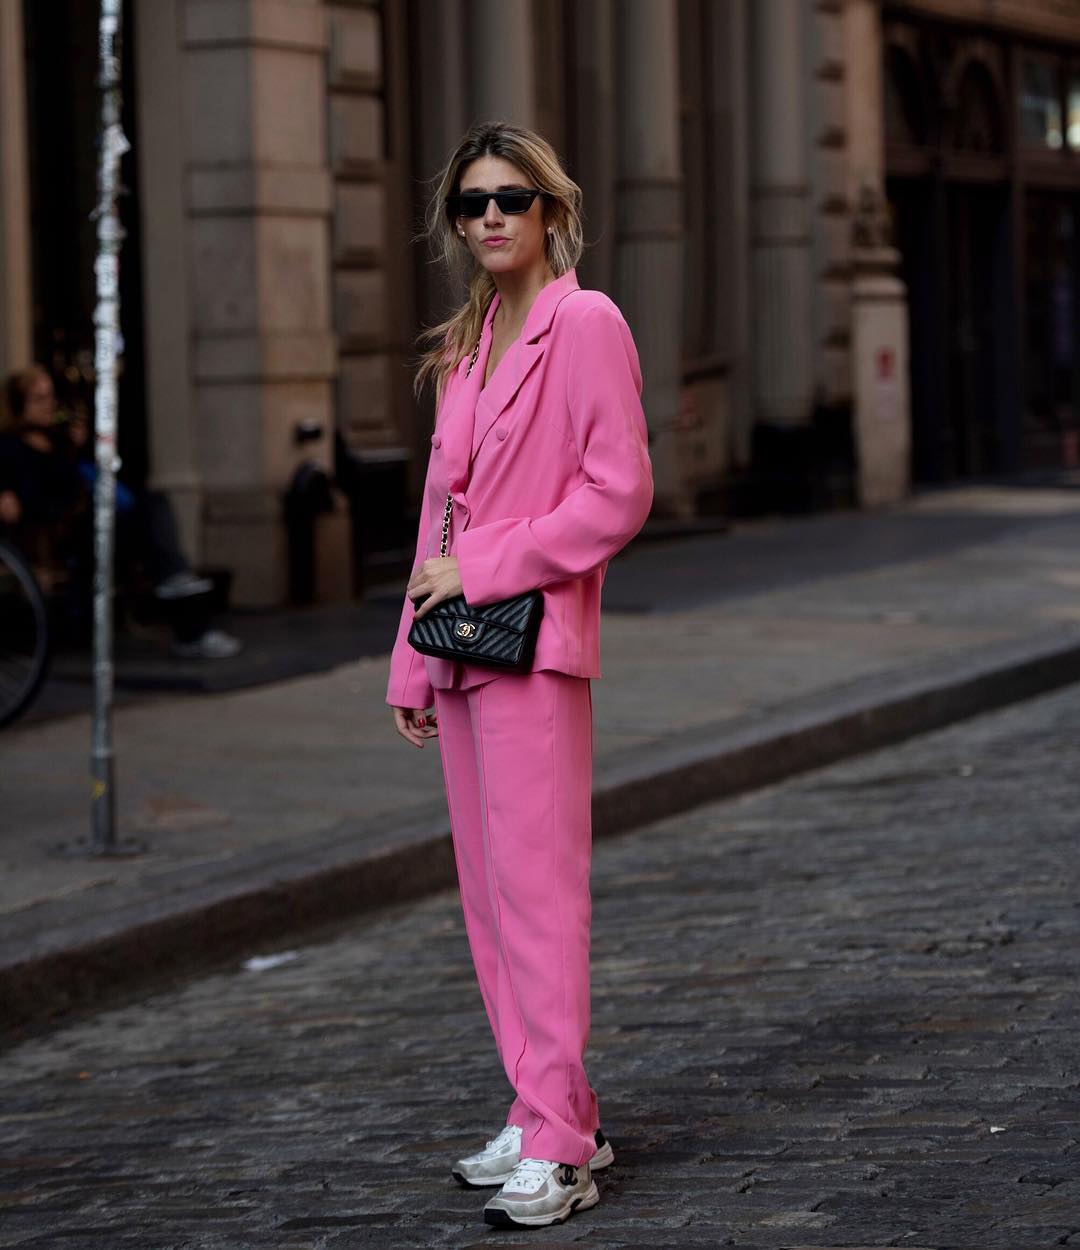 GIRLBOSS IN PINK - The Fashion State